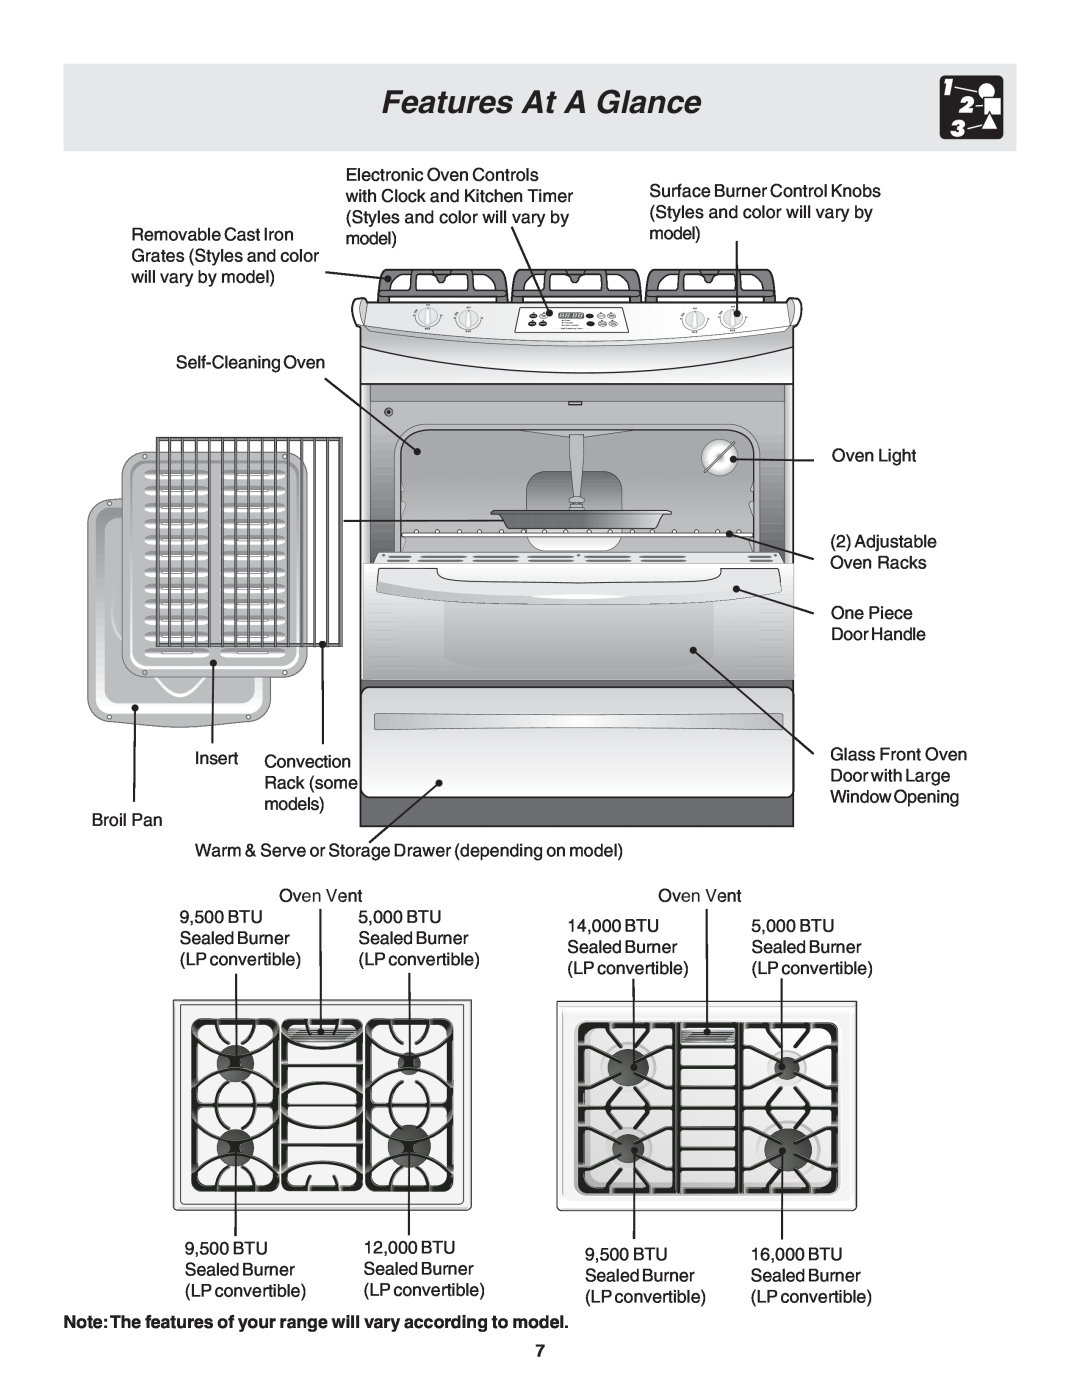 Frigidaire 318203866 warranty Features At A Glance, NoteThe features of your range will vary according to model 